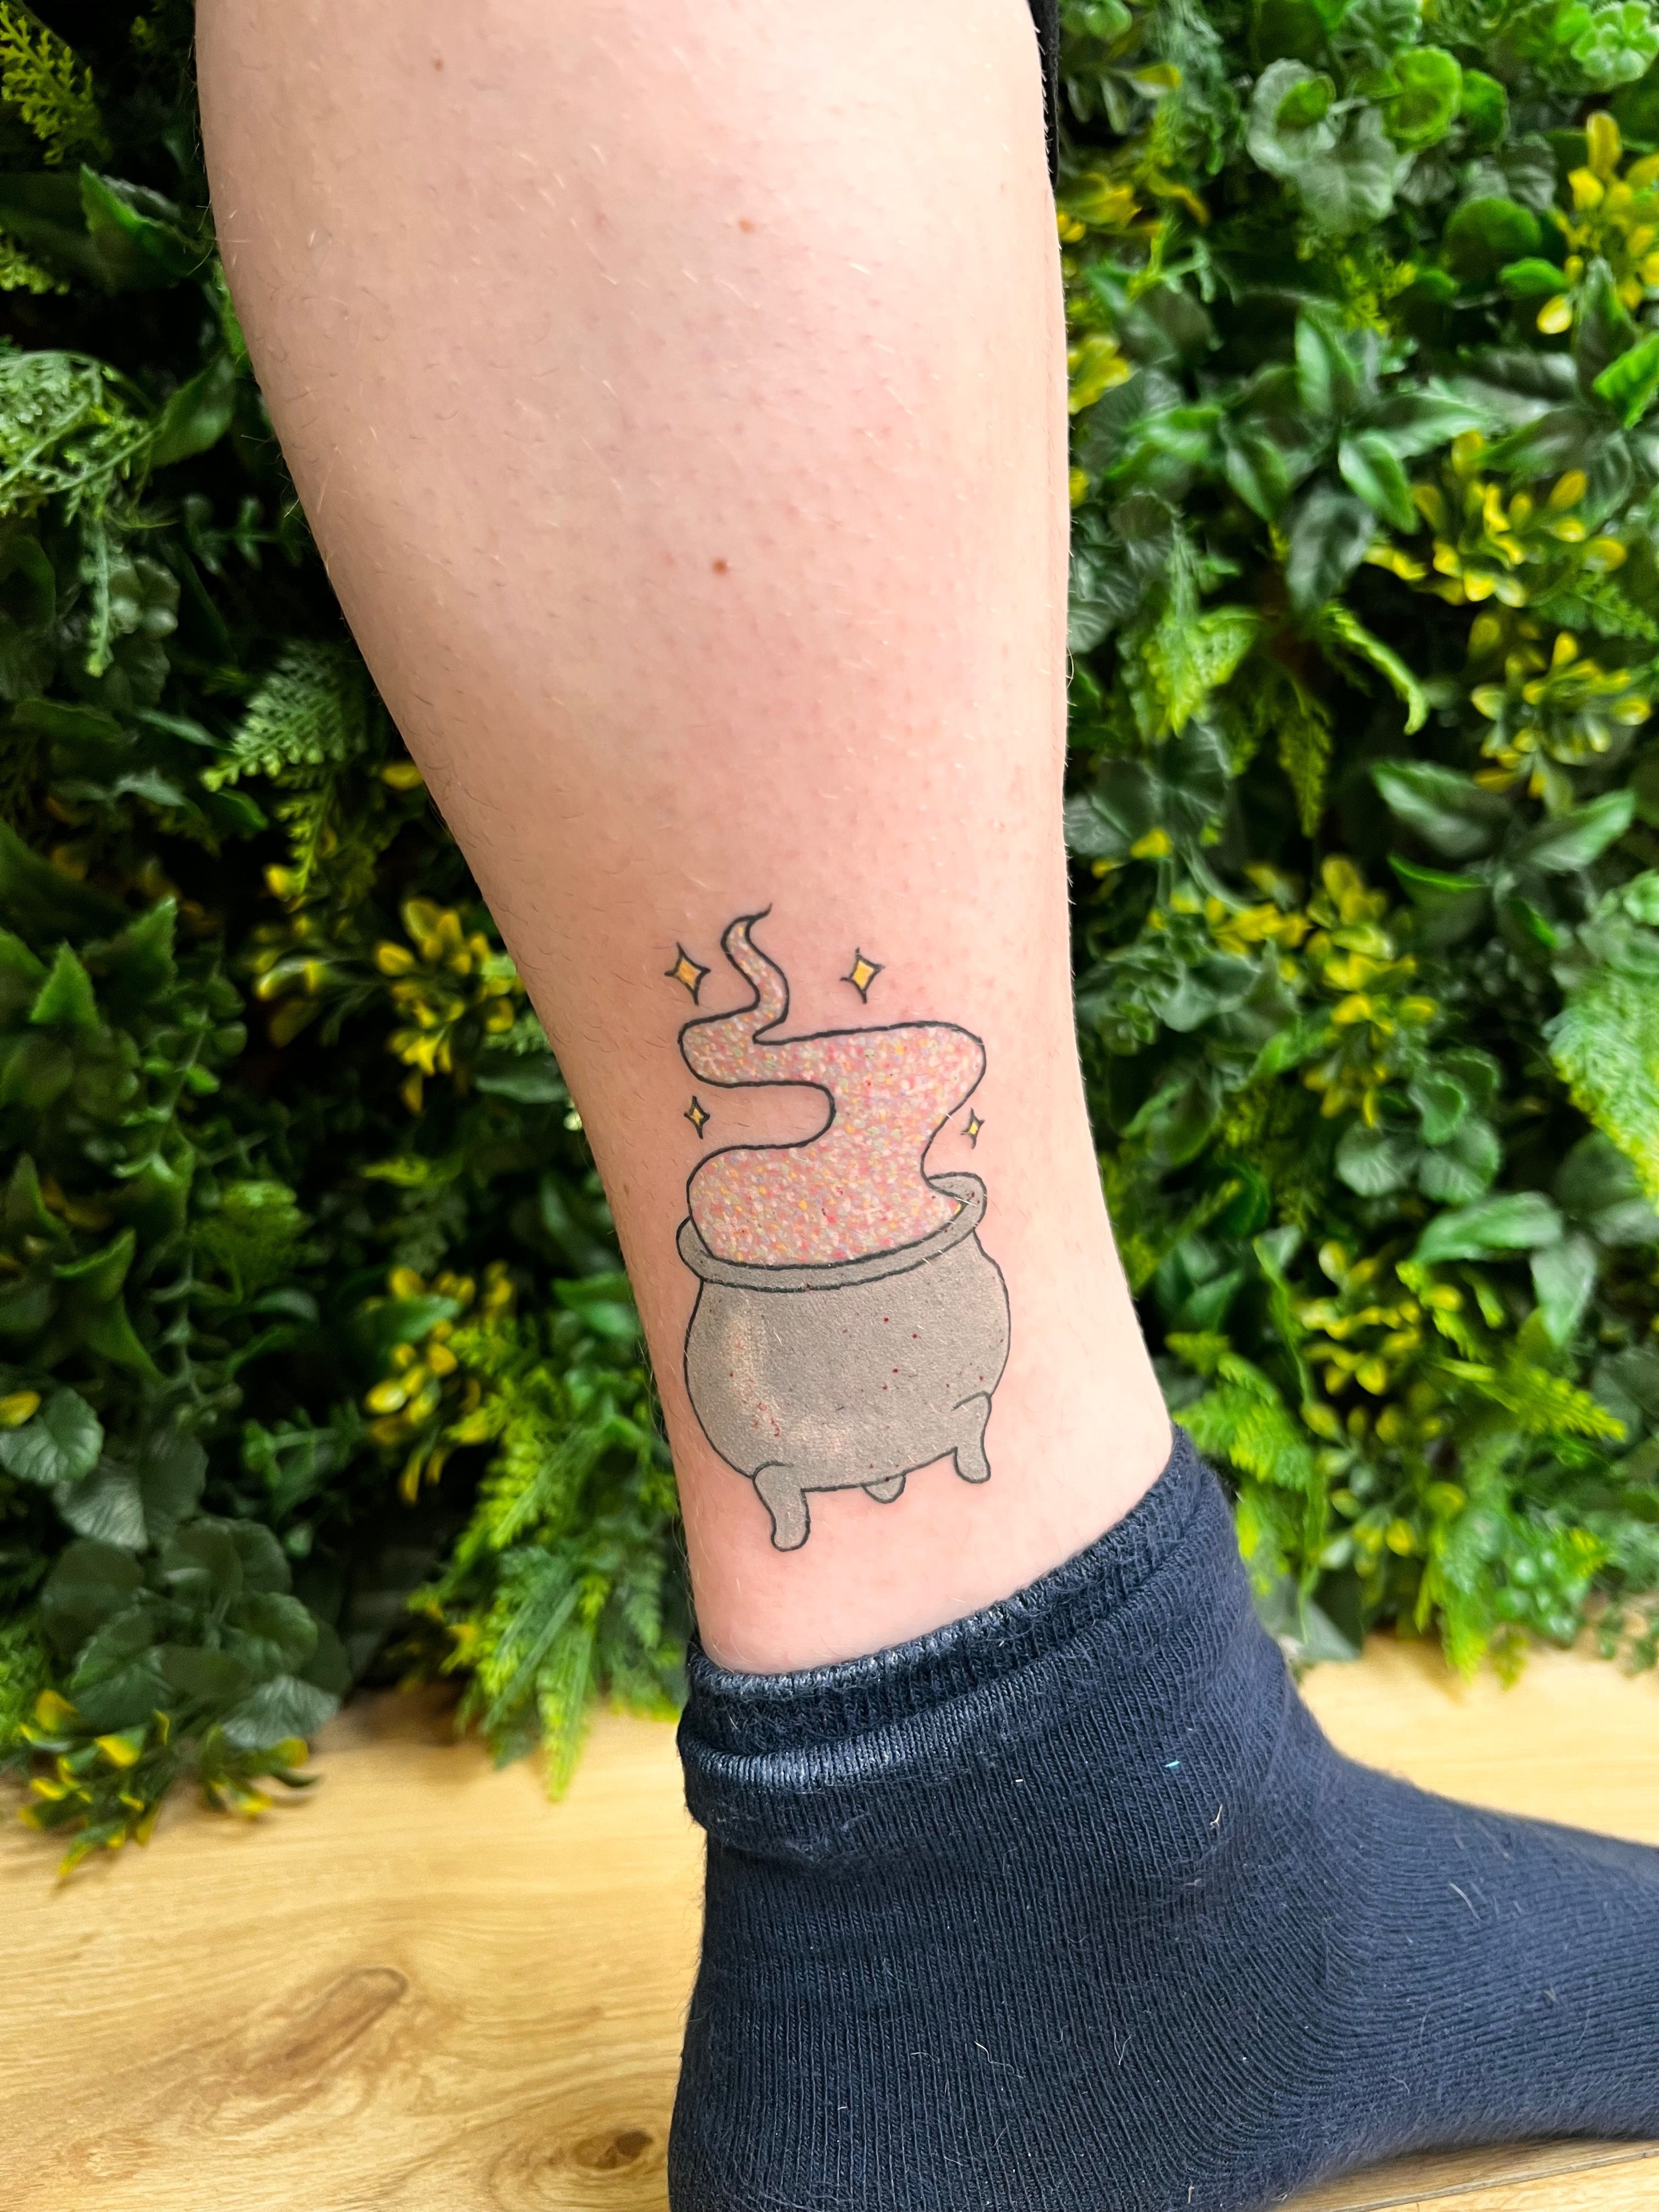 Tea Pot tattoo. There's nothing quite like a good cup a' tea ☕️ | TikTok